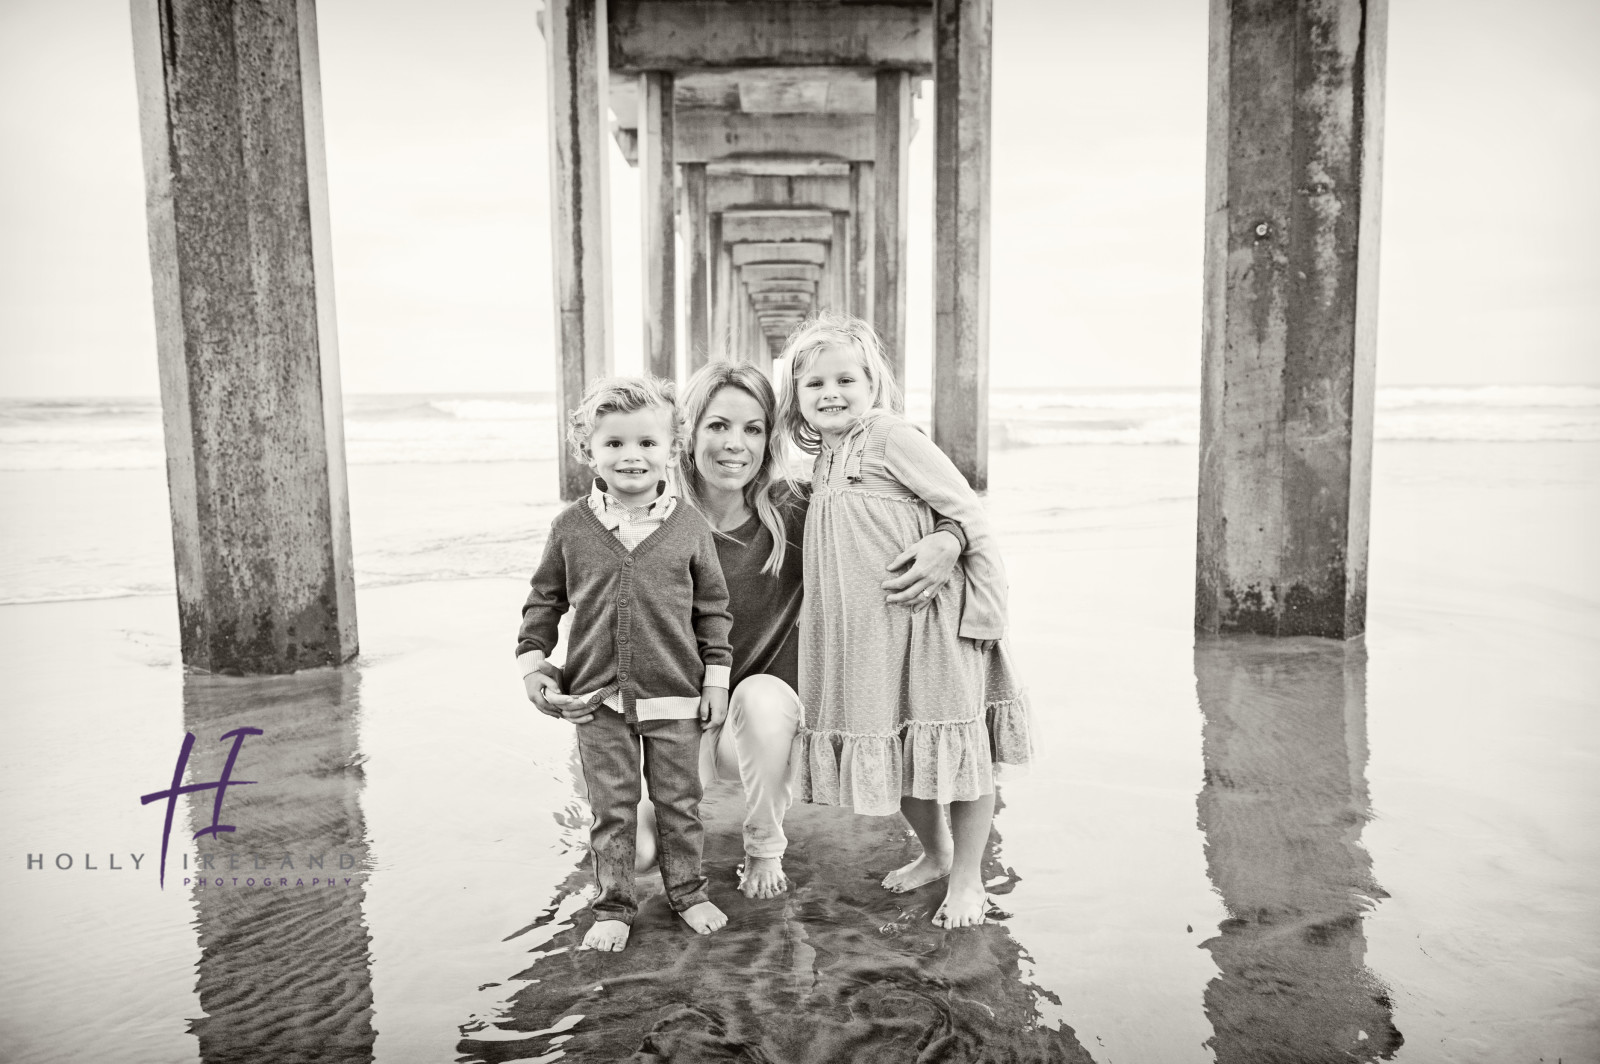 La Jolla Family Photography at the Scripps Pier